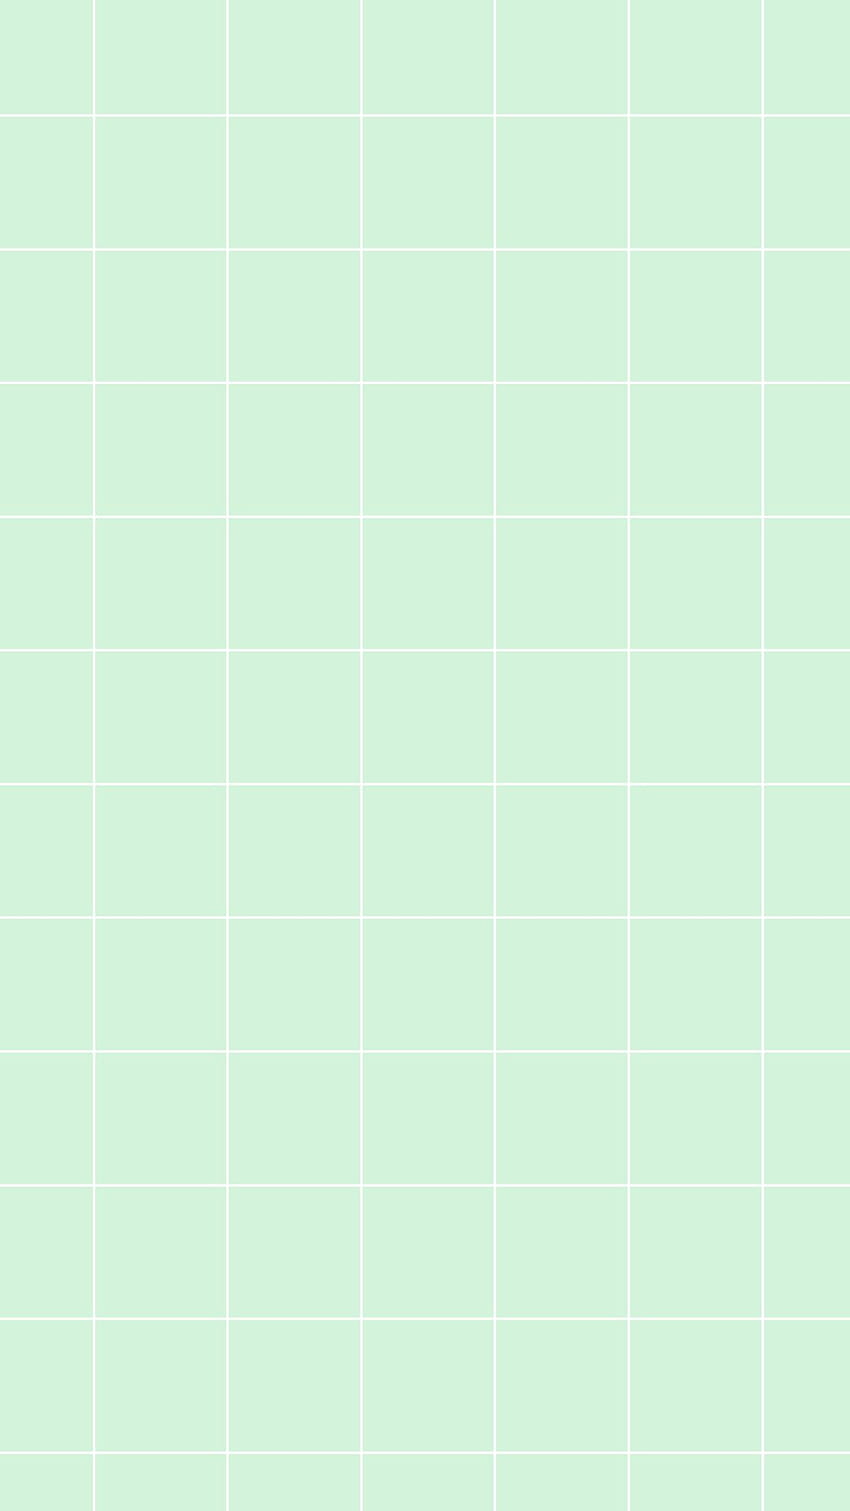 A green and white background with squares - Grid